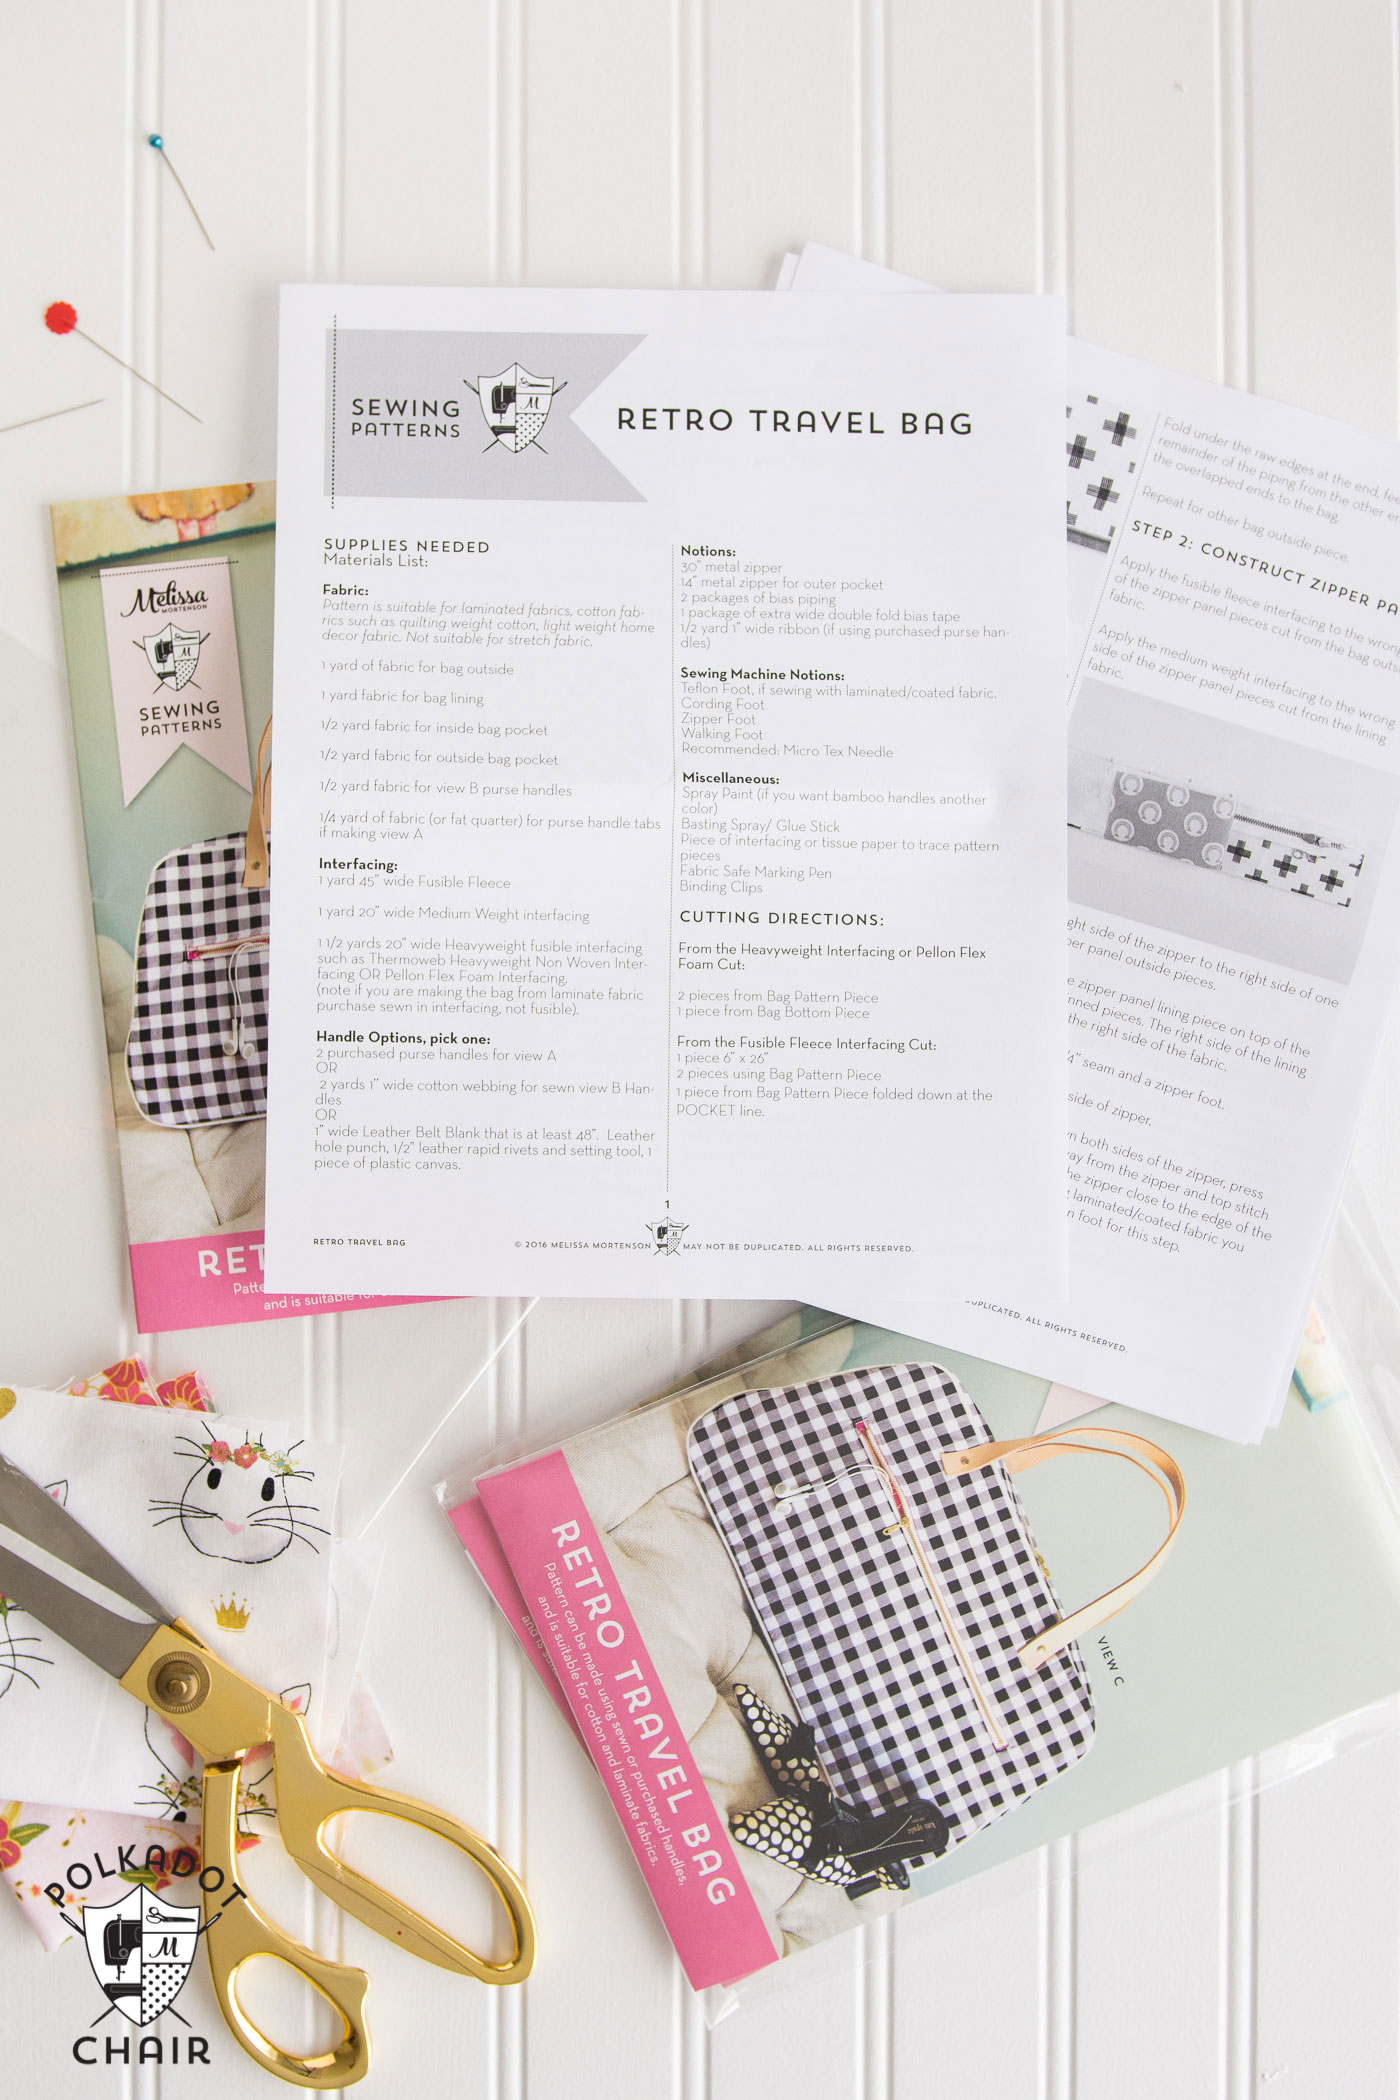 Printed copies of the Retro Travel Bag Sewing Pattern and the Gingham Daydream Quilt Pattern by Melissa Mortenson